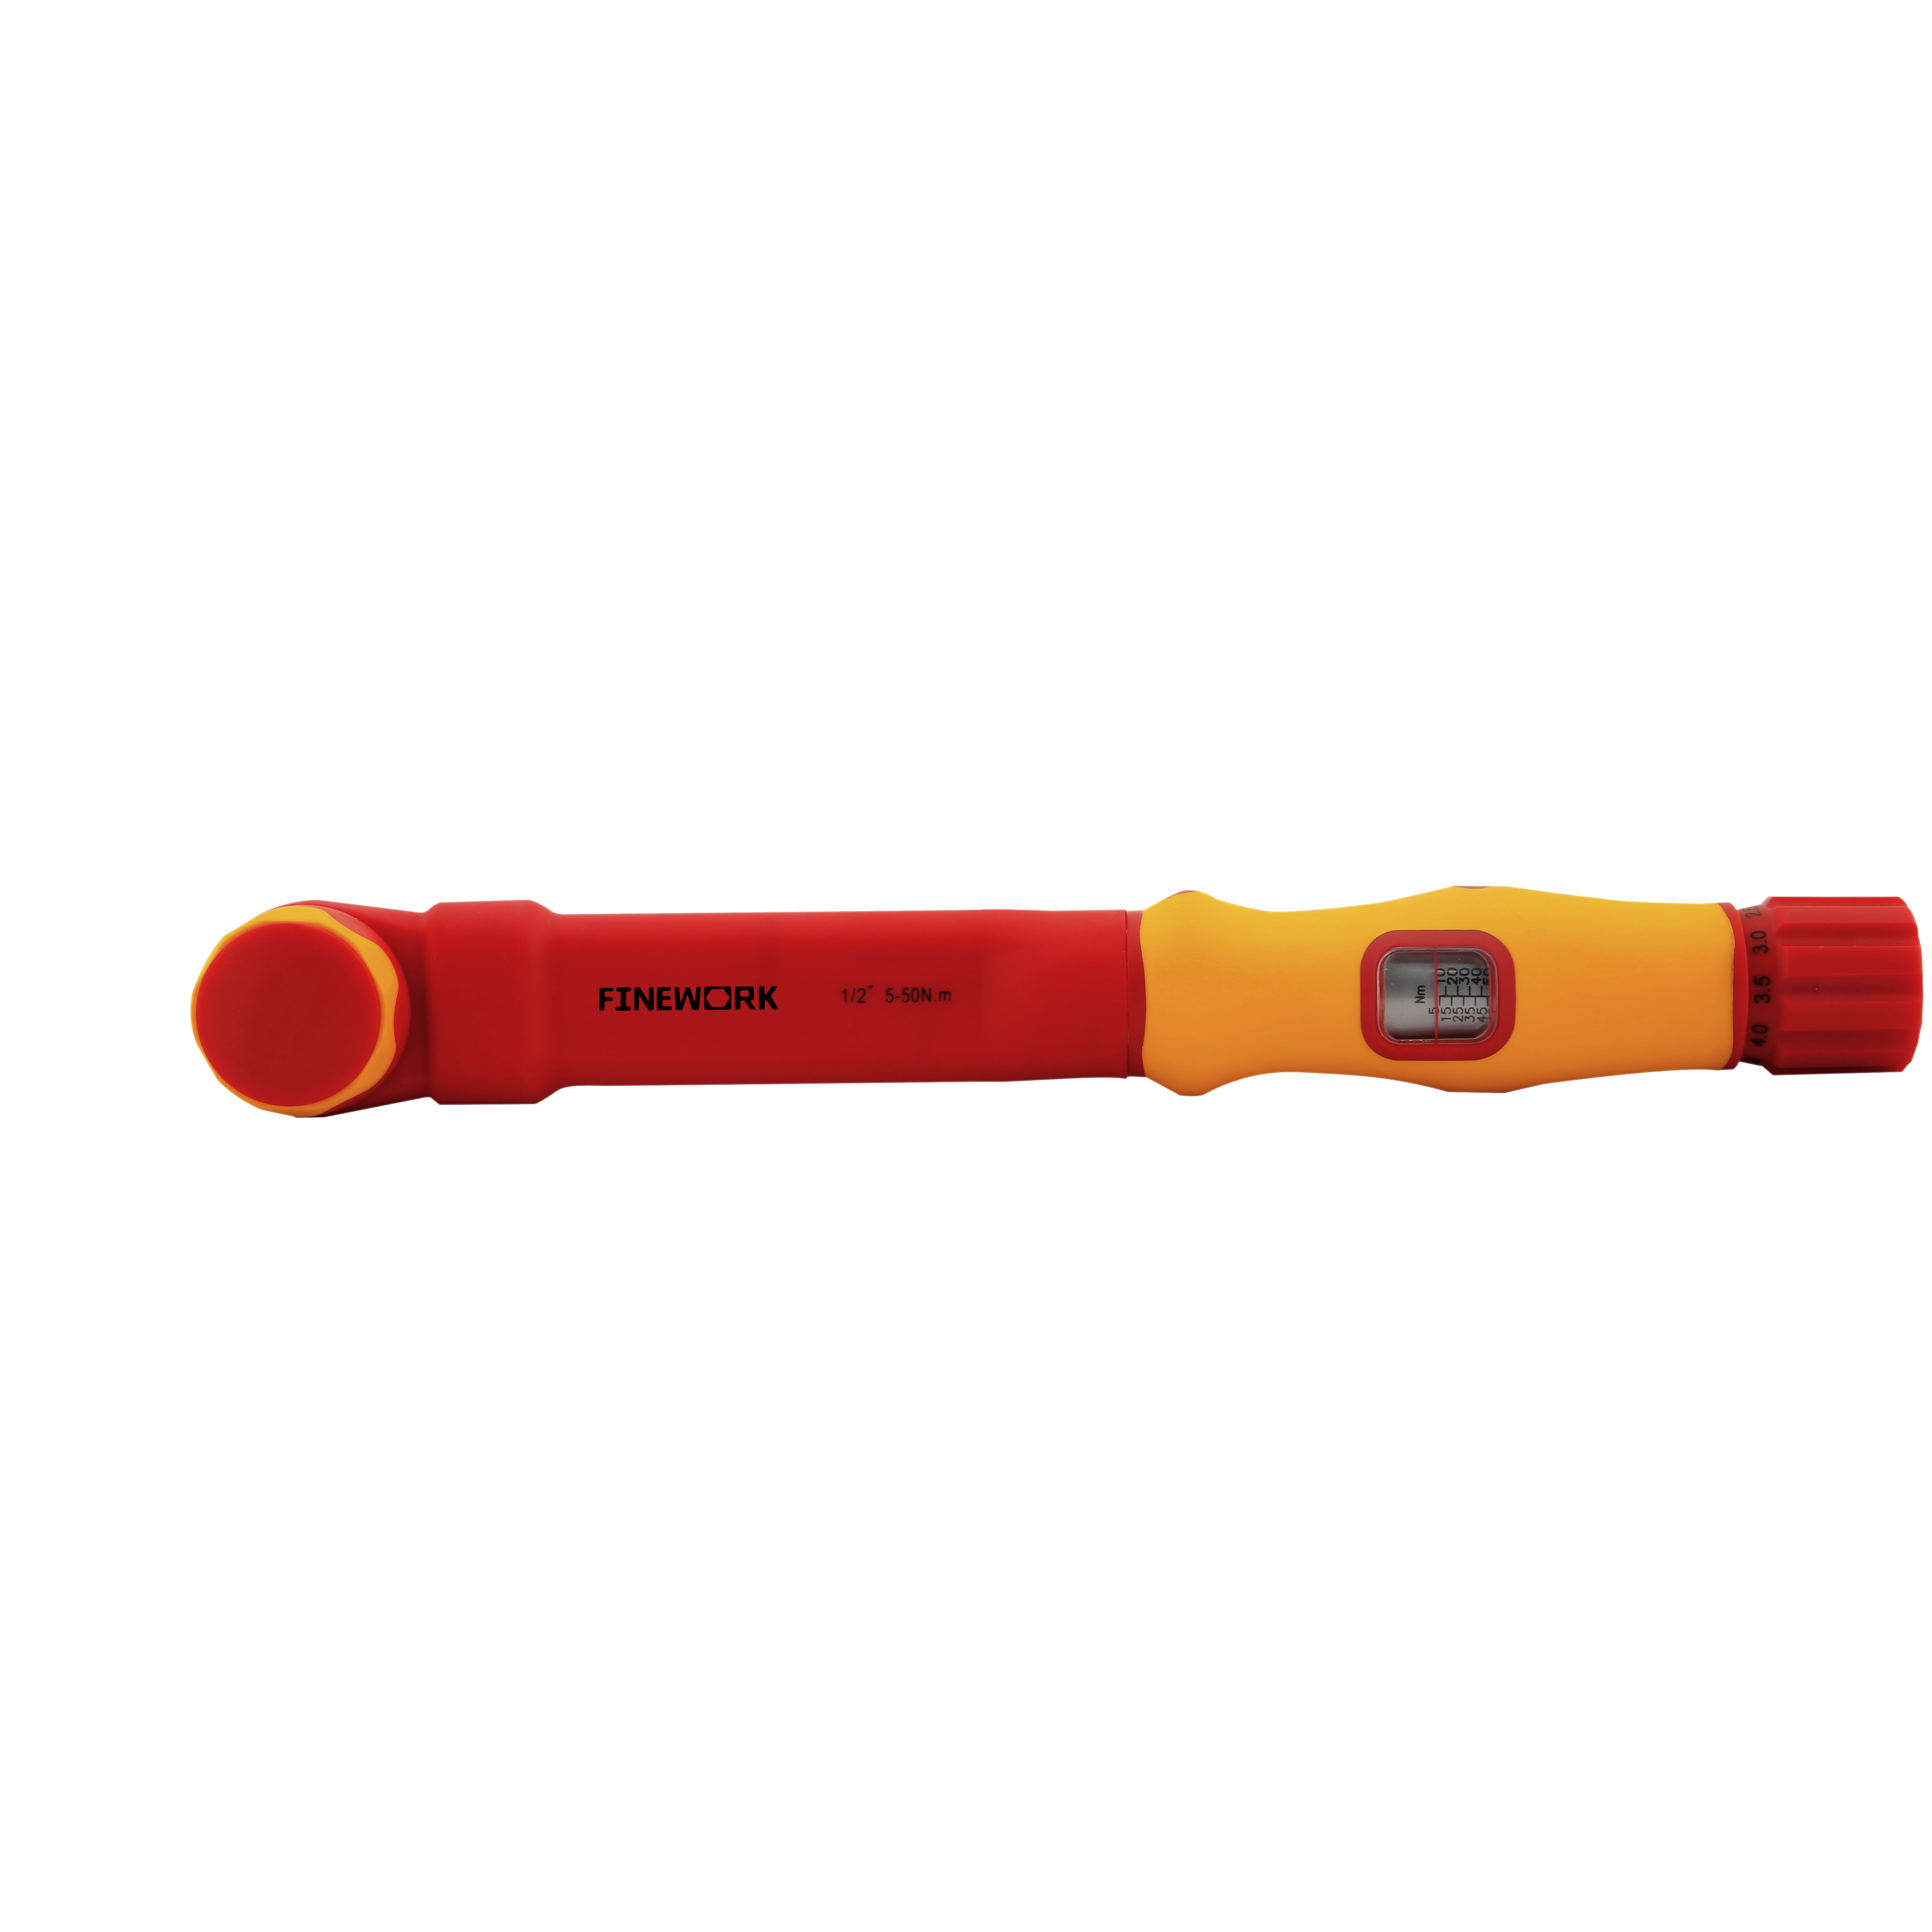 92LB806 VED Insulated Reversible Ratchet Torque Wrench Socket Wrench 1000v